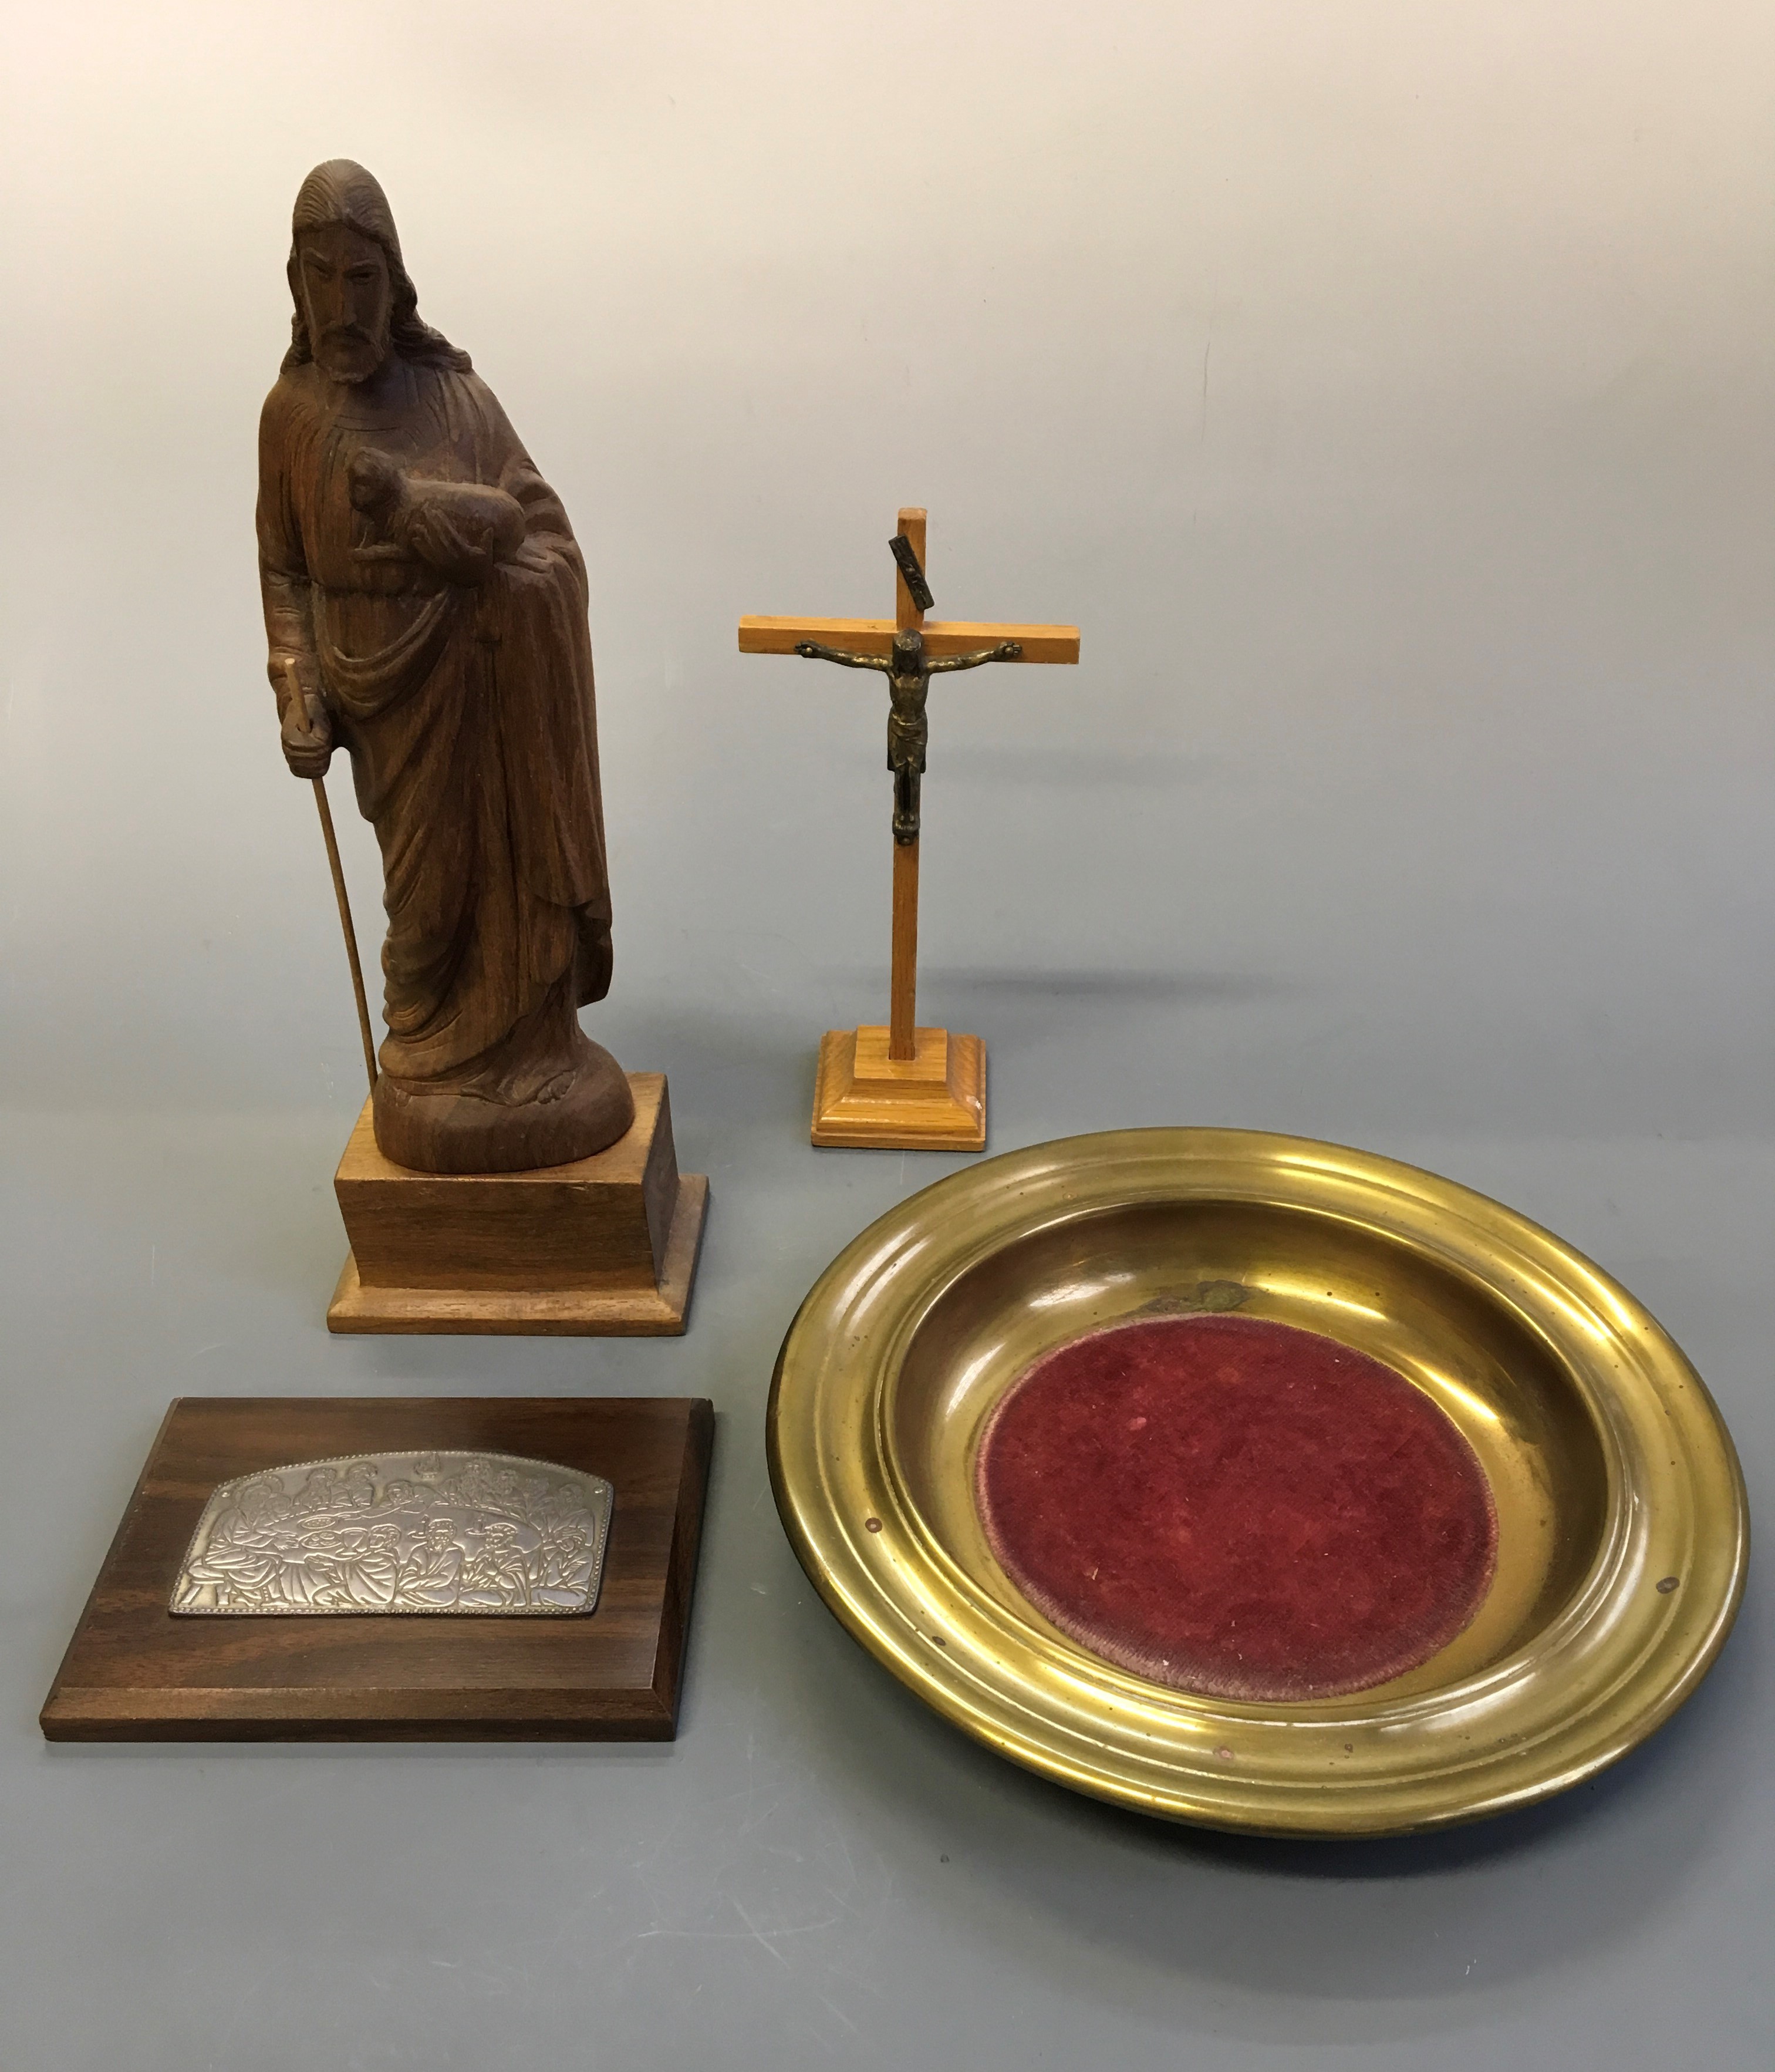 A collection tray, wooden figurine of Christ with lamb, wooden Crucifix with brass Christ on cross